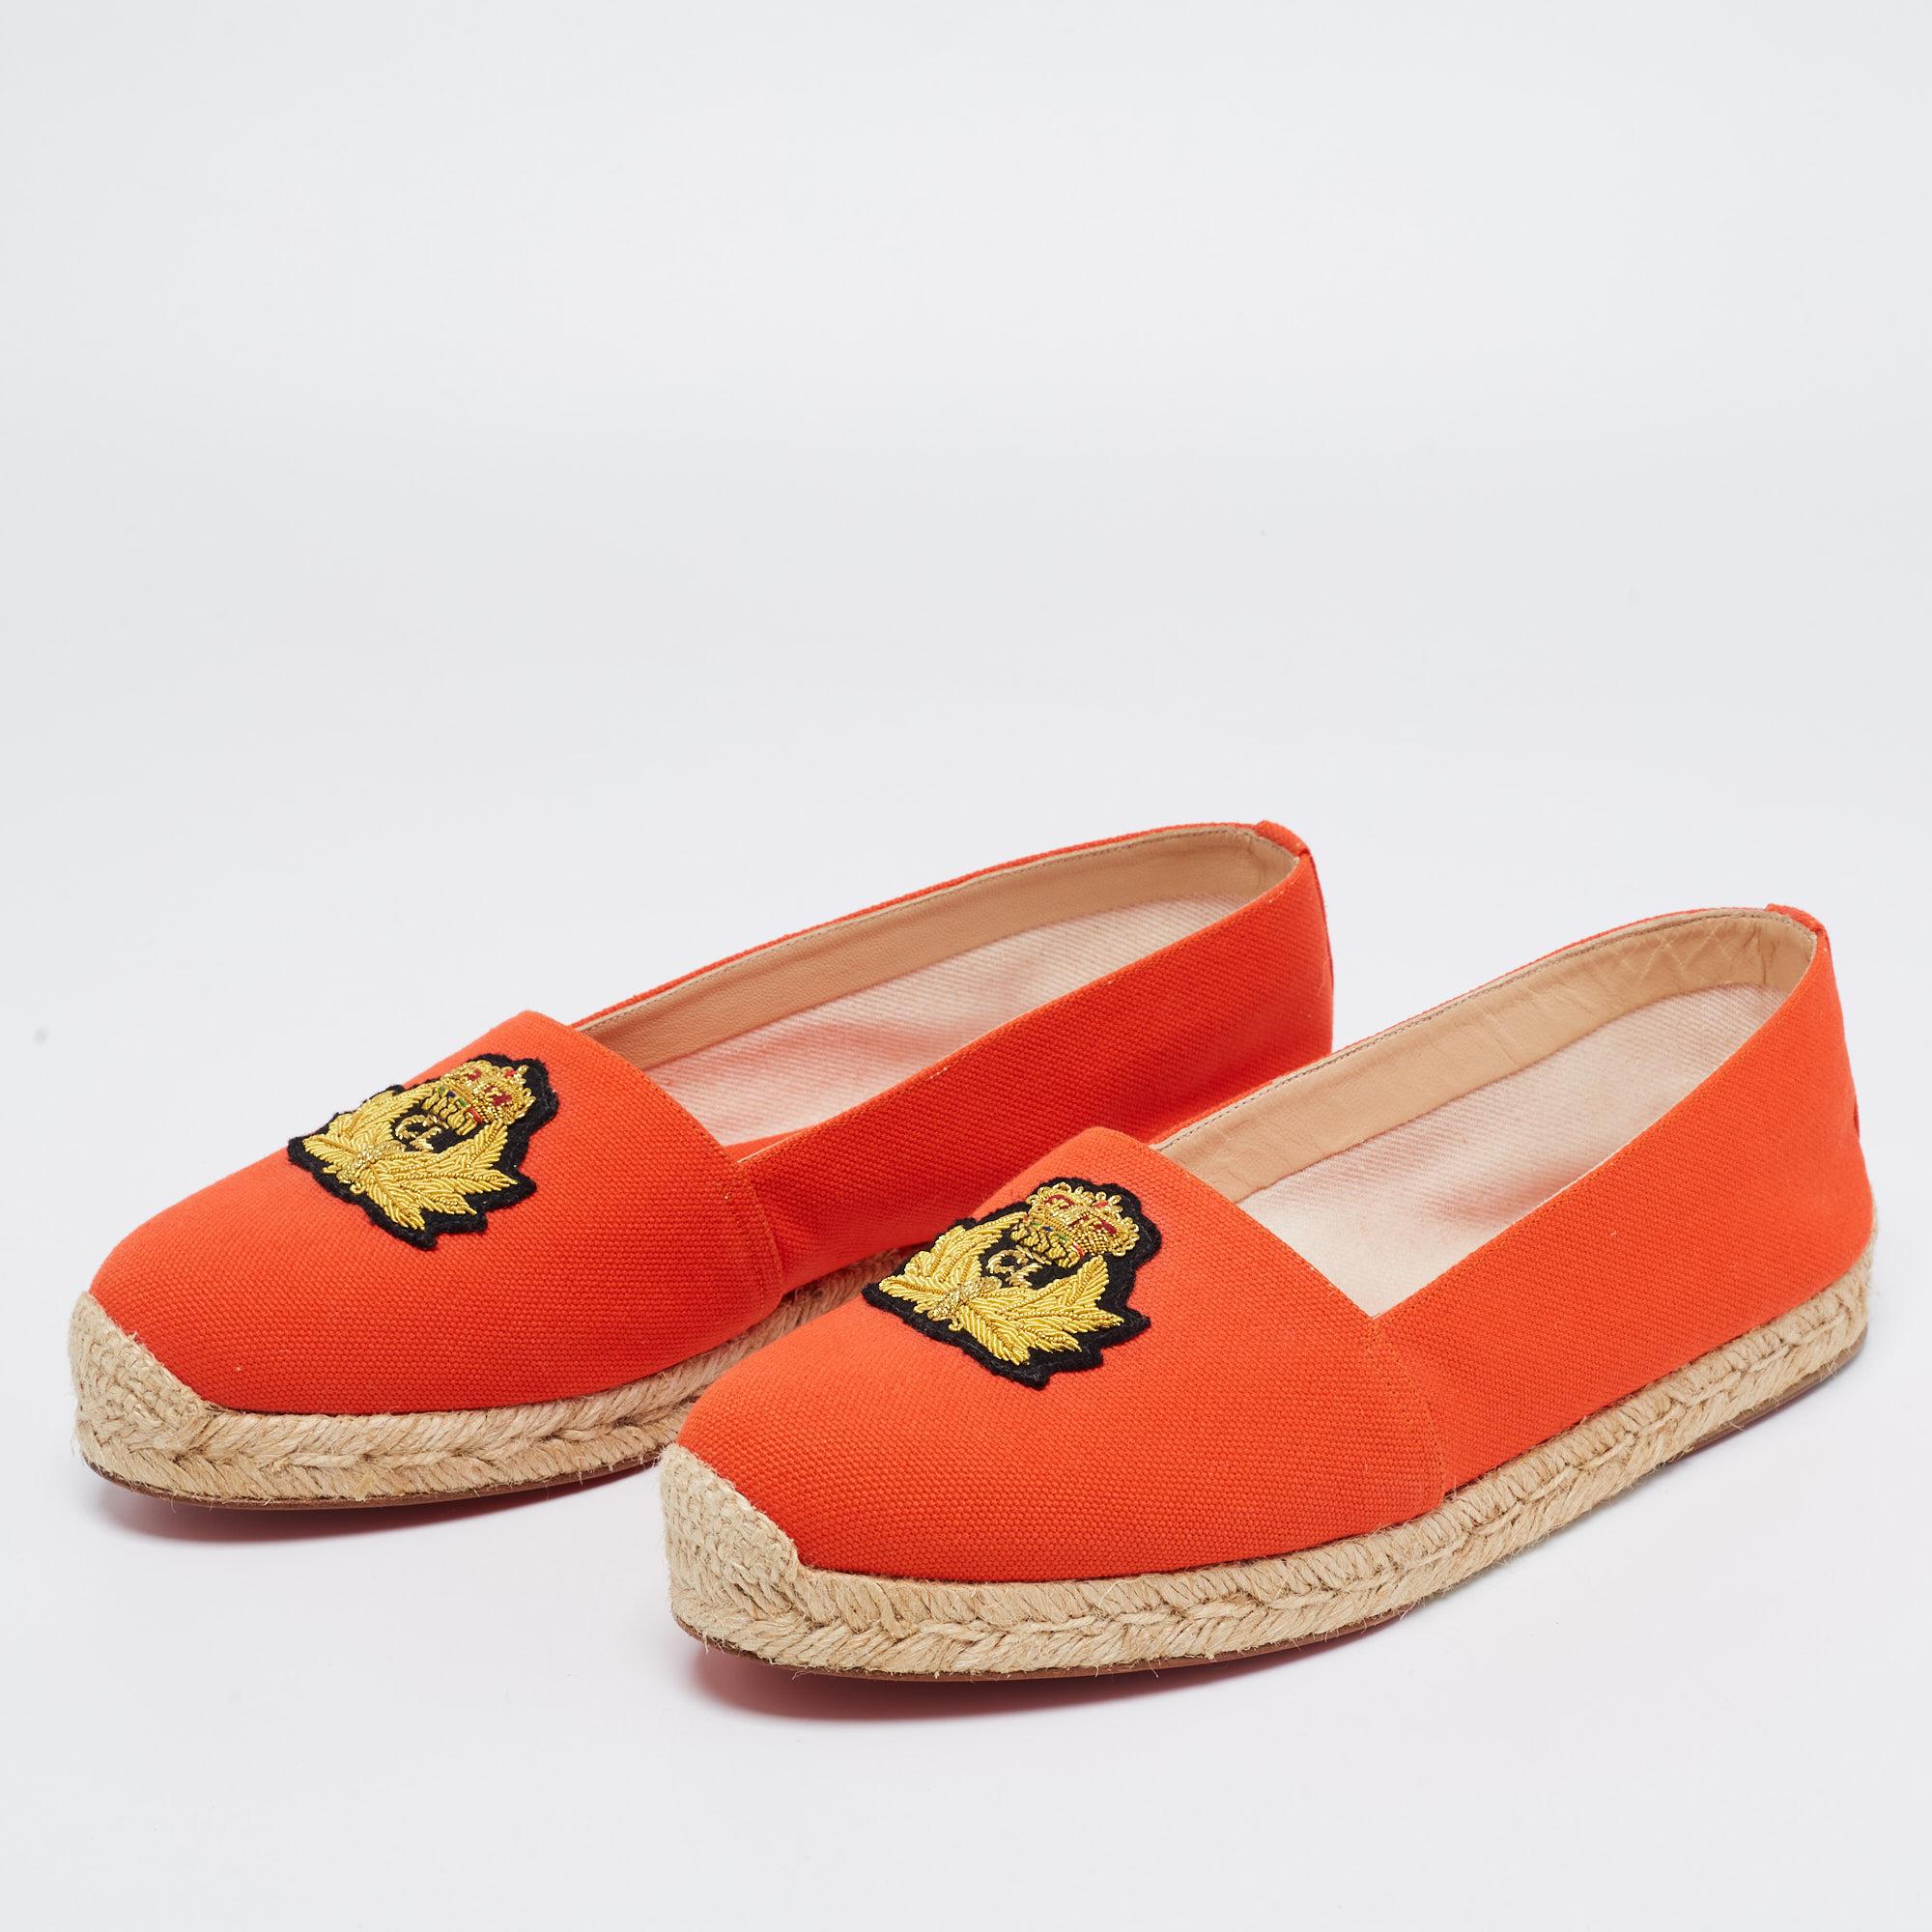 Christian Louboutin brings you these super-stylish espadrilles to achieve an ultimate casual look. They are crafted skillfully using orange canvas on the exterior with an embroidered crest applique decorating the vamps. Their structure is installed